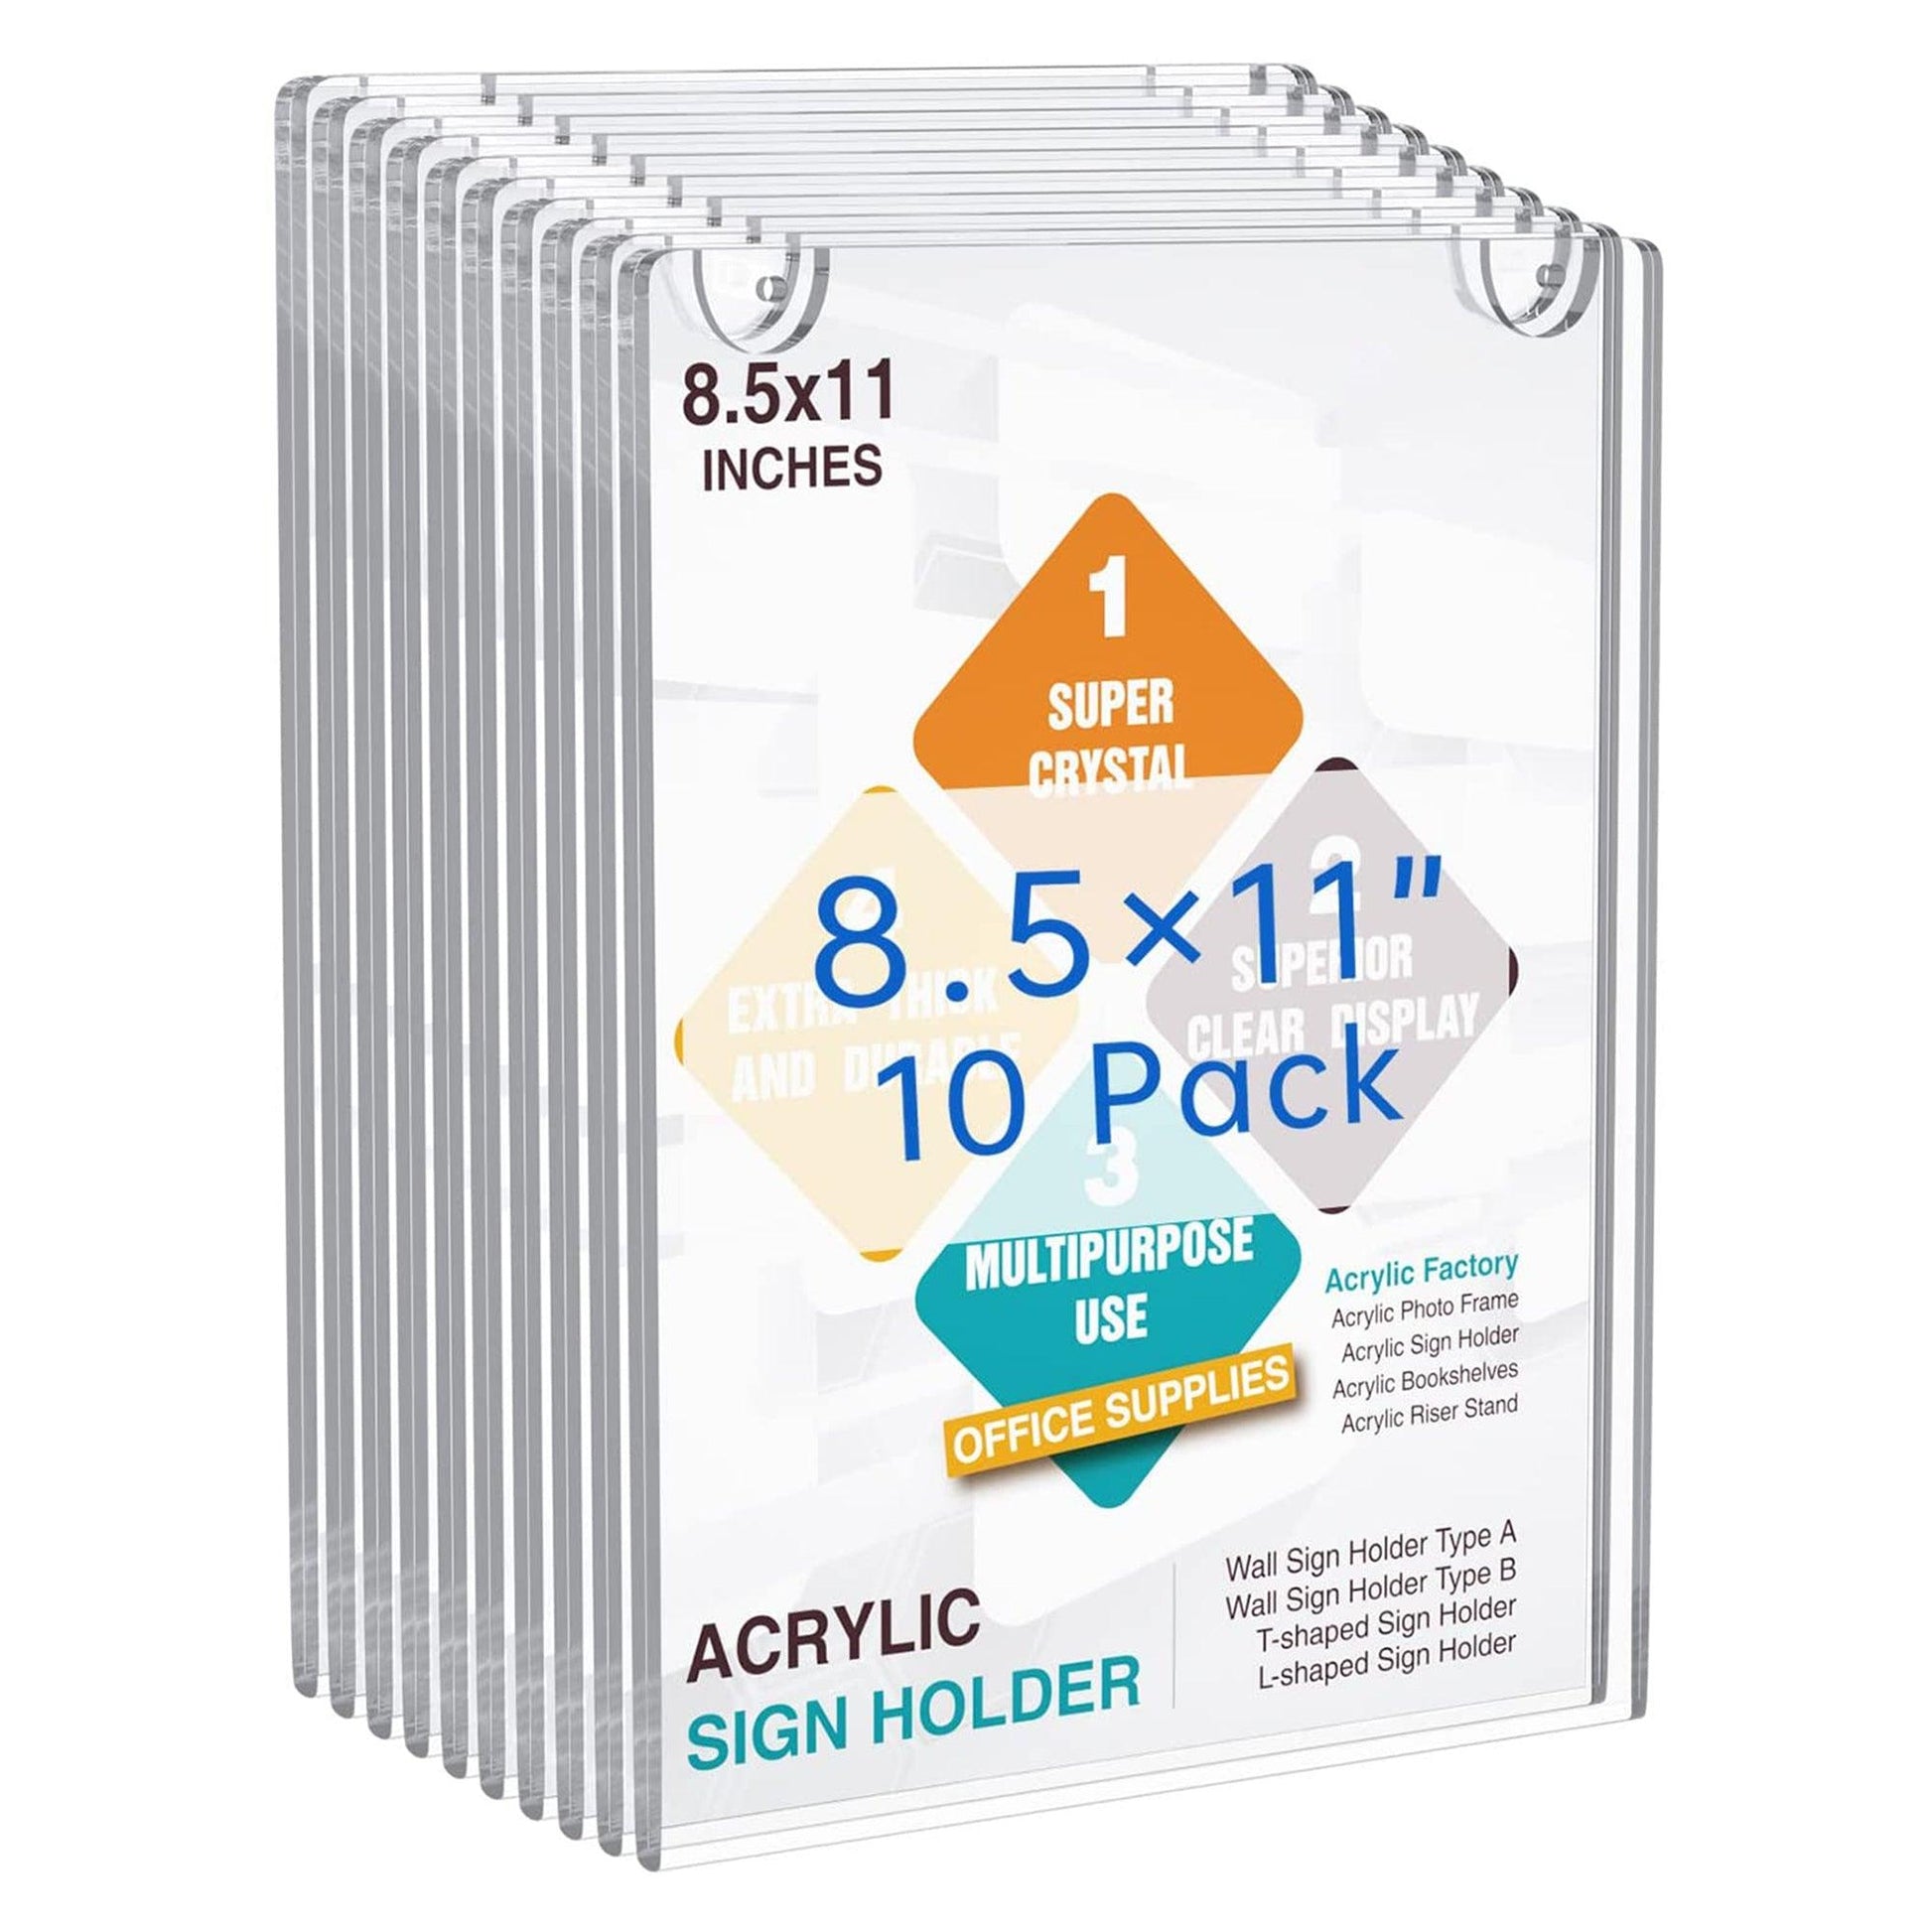 Acrylic Wall Sign Holder- 10 pack